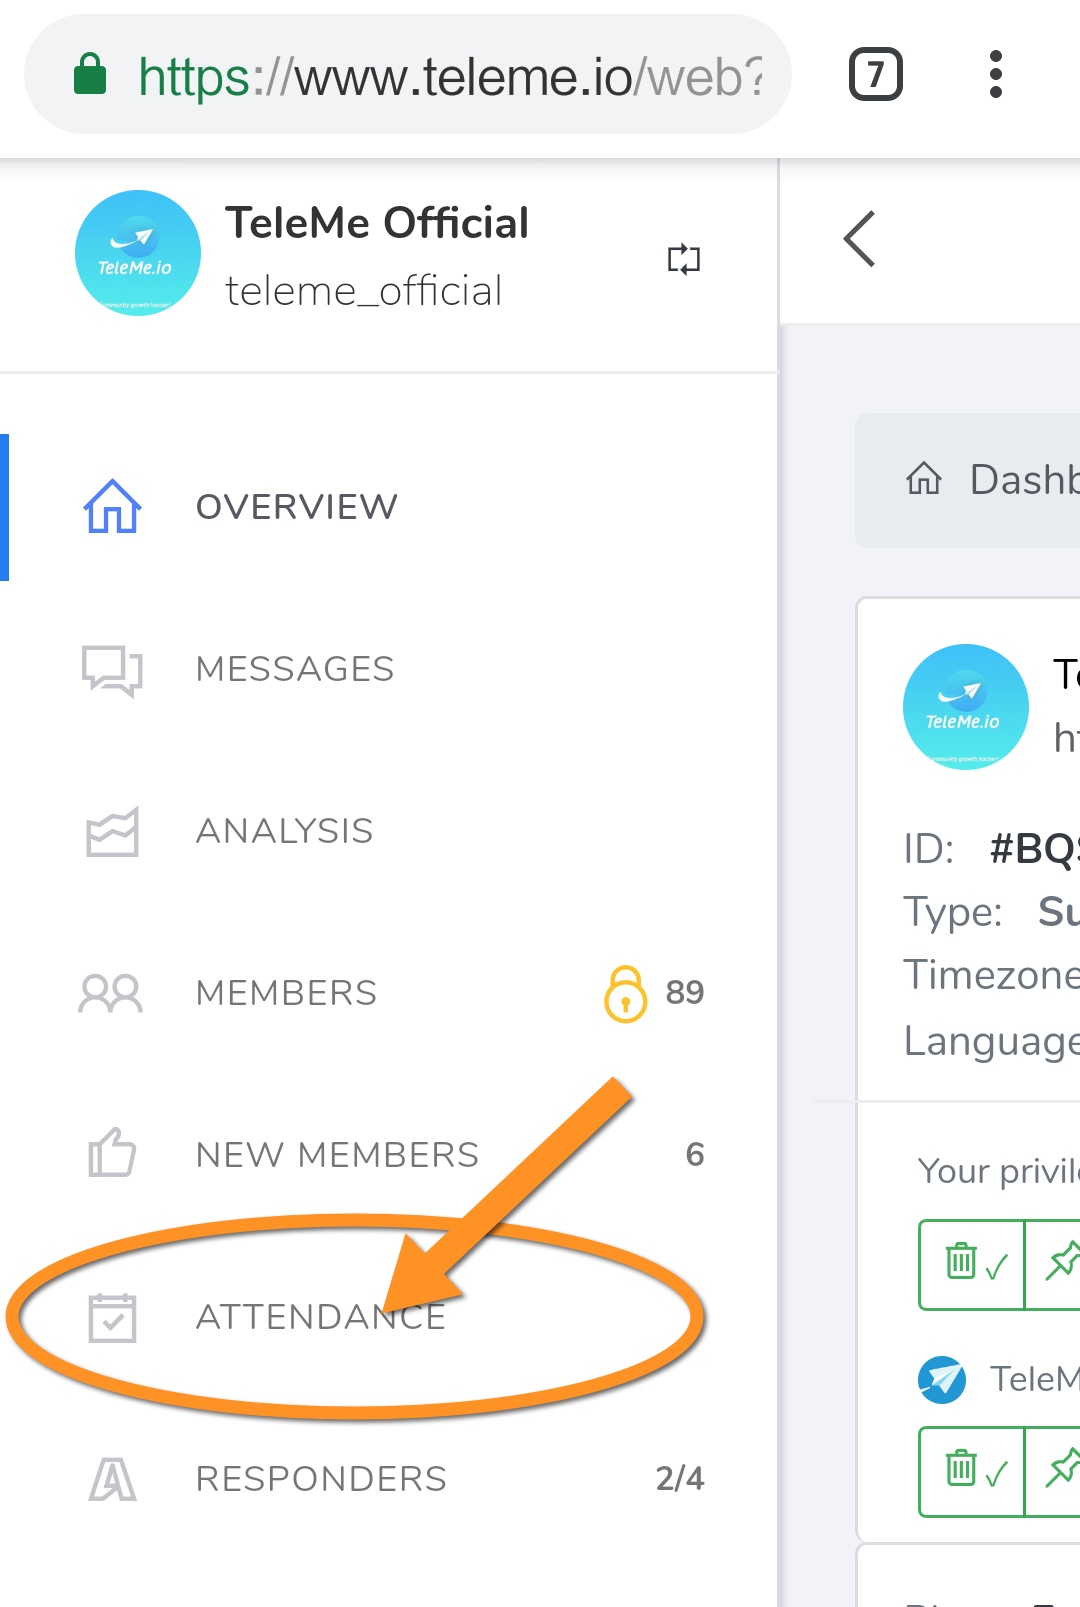 Tap "Attendance" from the left side navigation bar